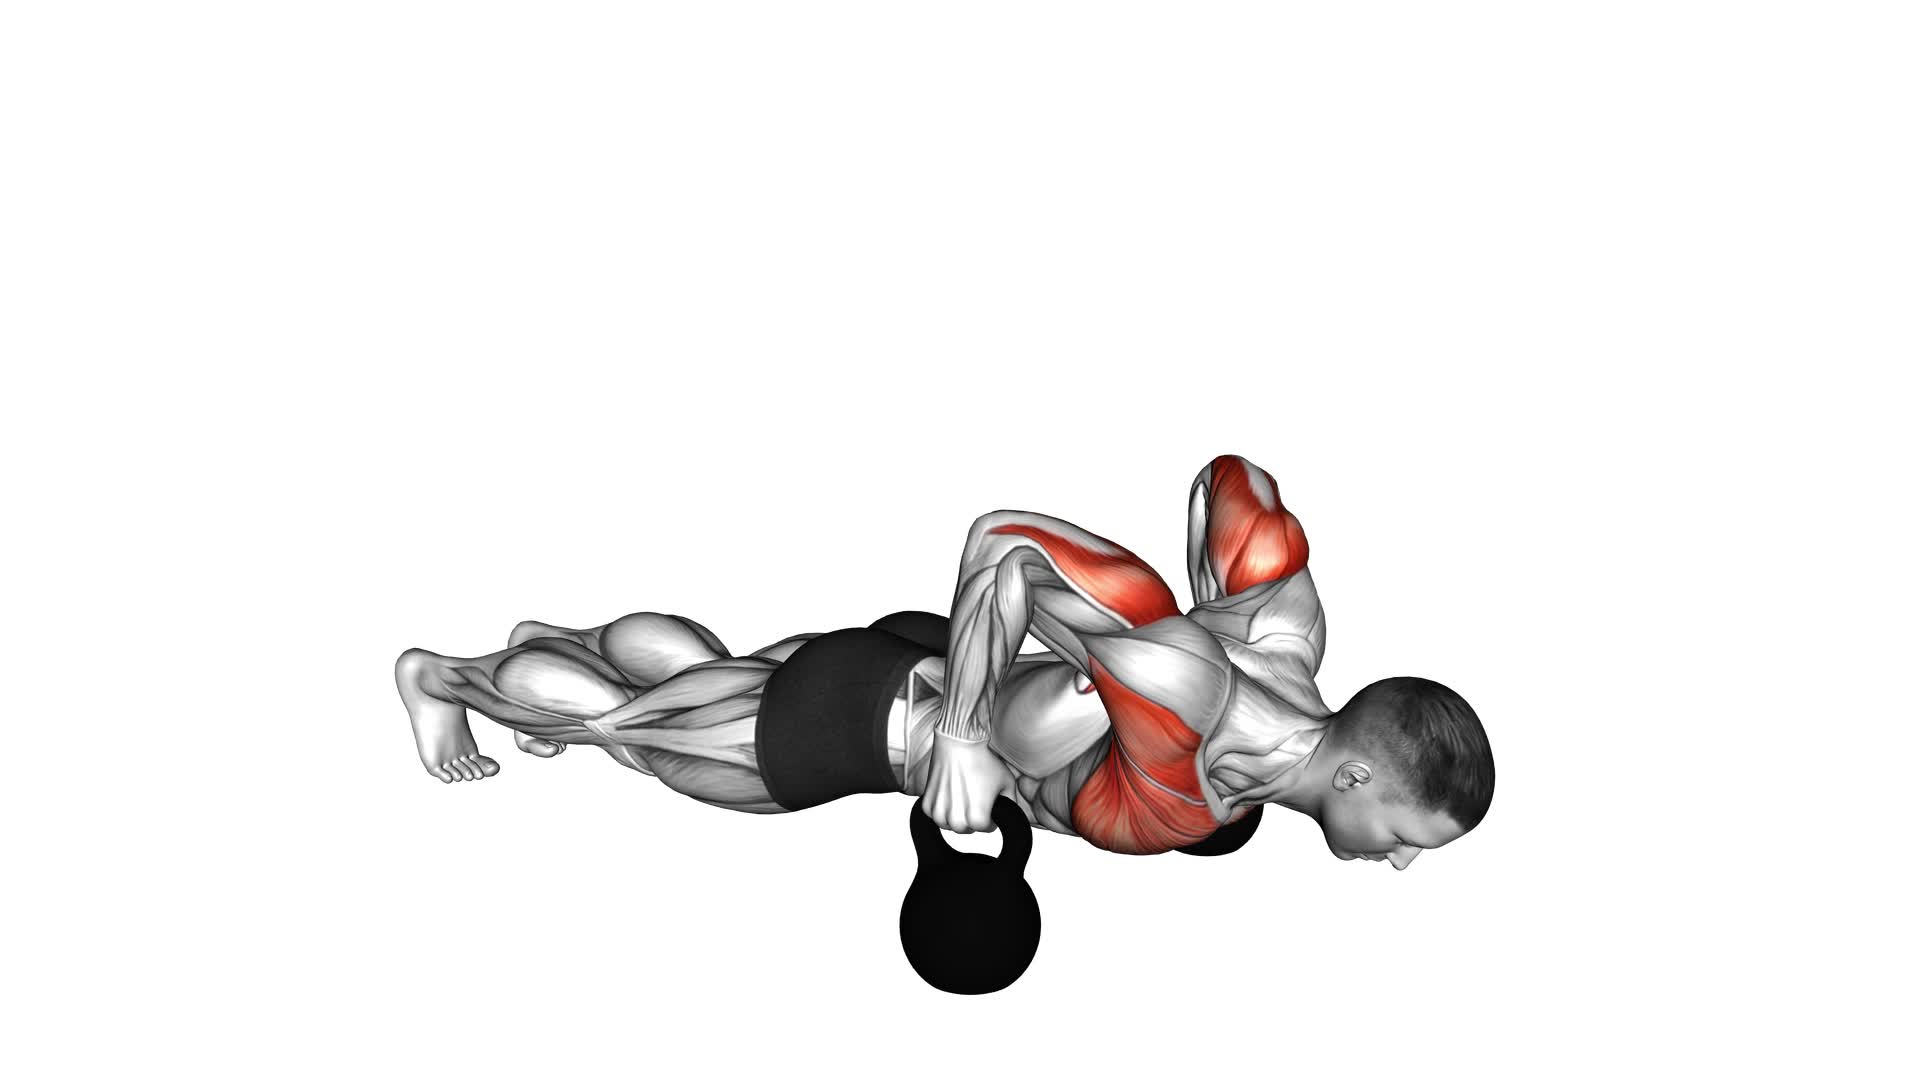 Kettlebell Deep Push-up - Video Exercise Guide & Tips